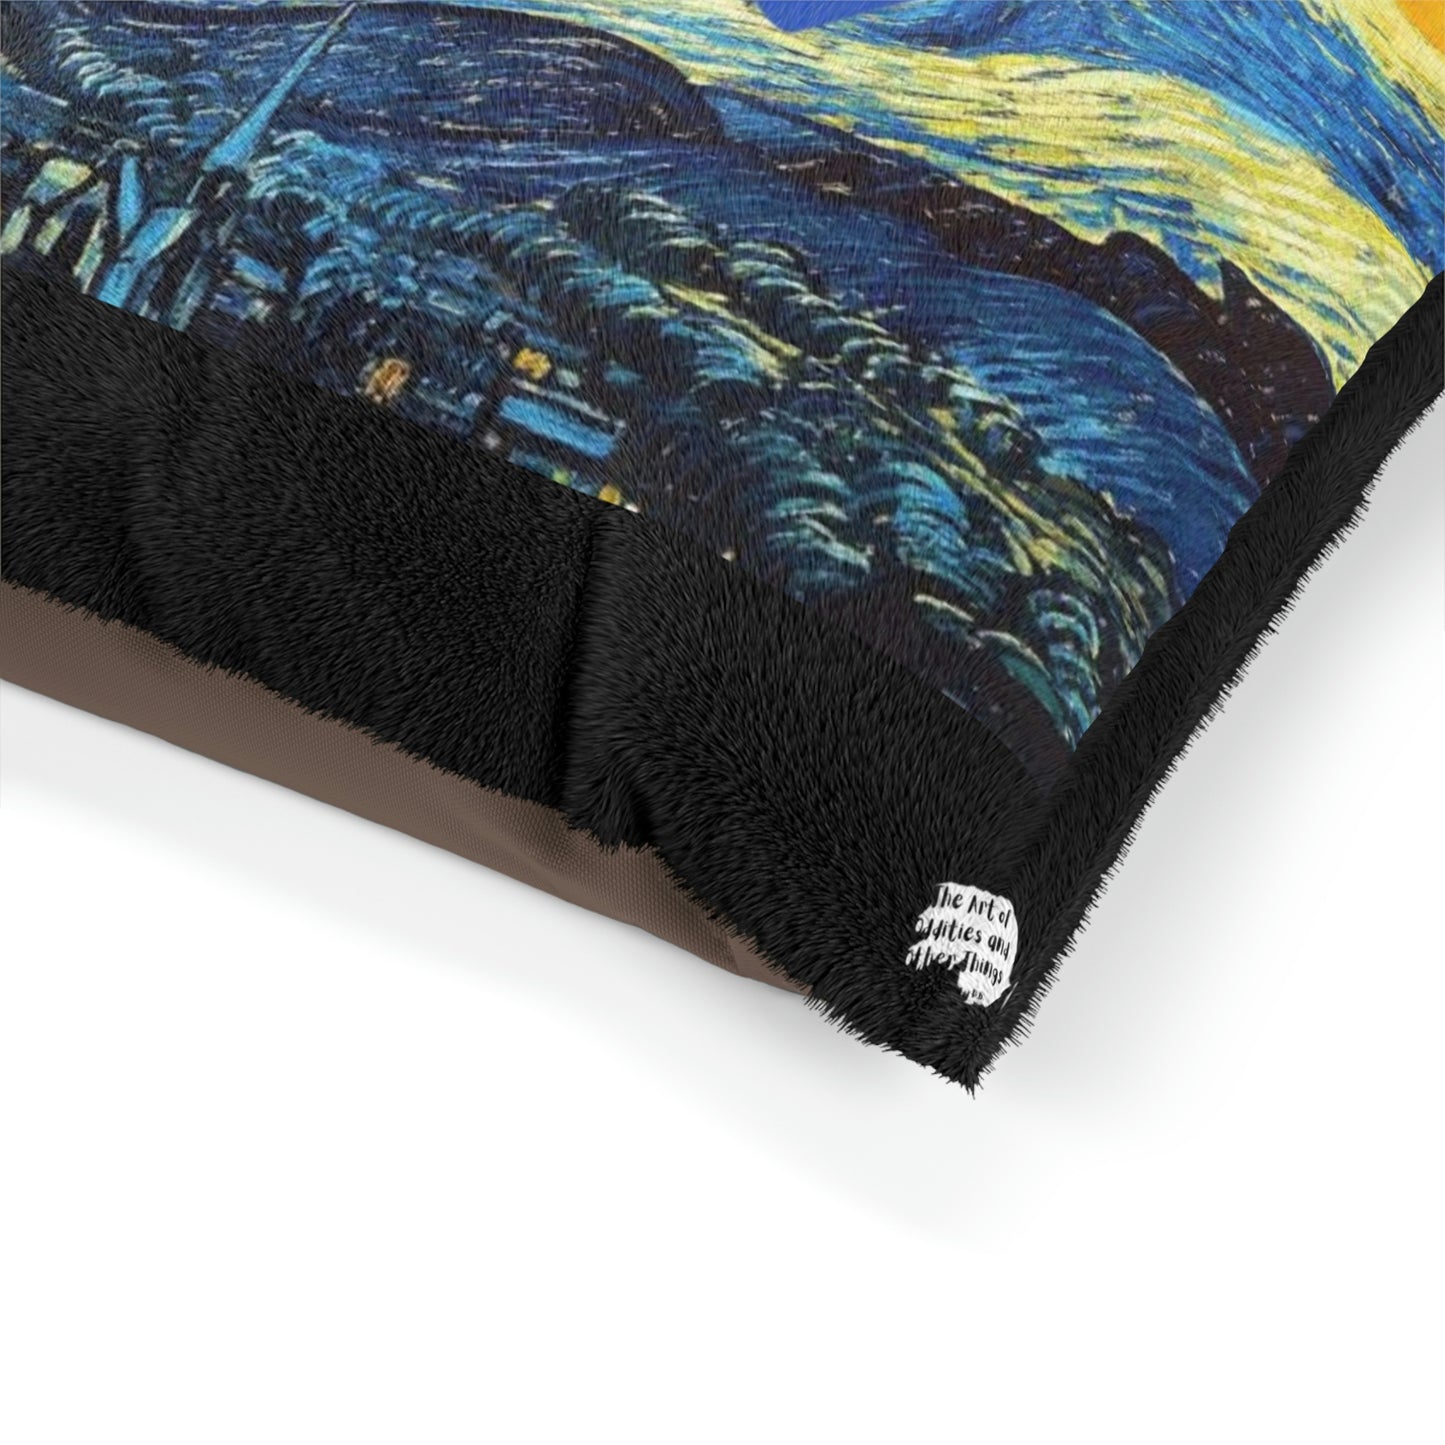 Luxury Pet Bed with Oddly Starry Night by D.B. Print